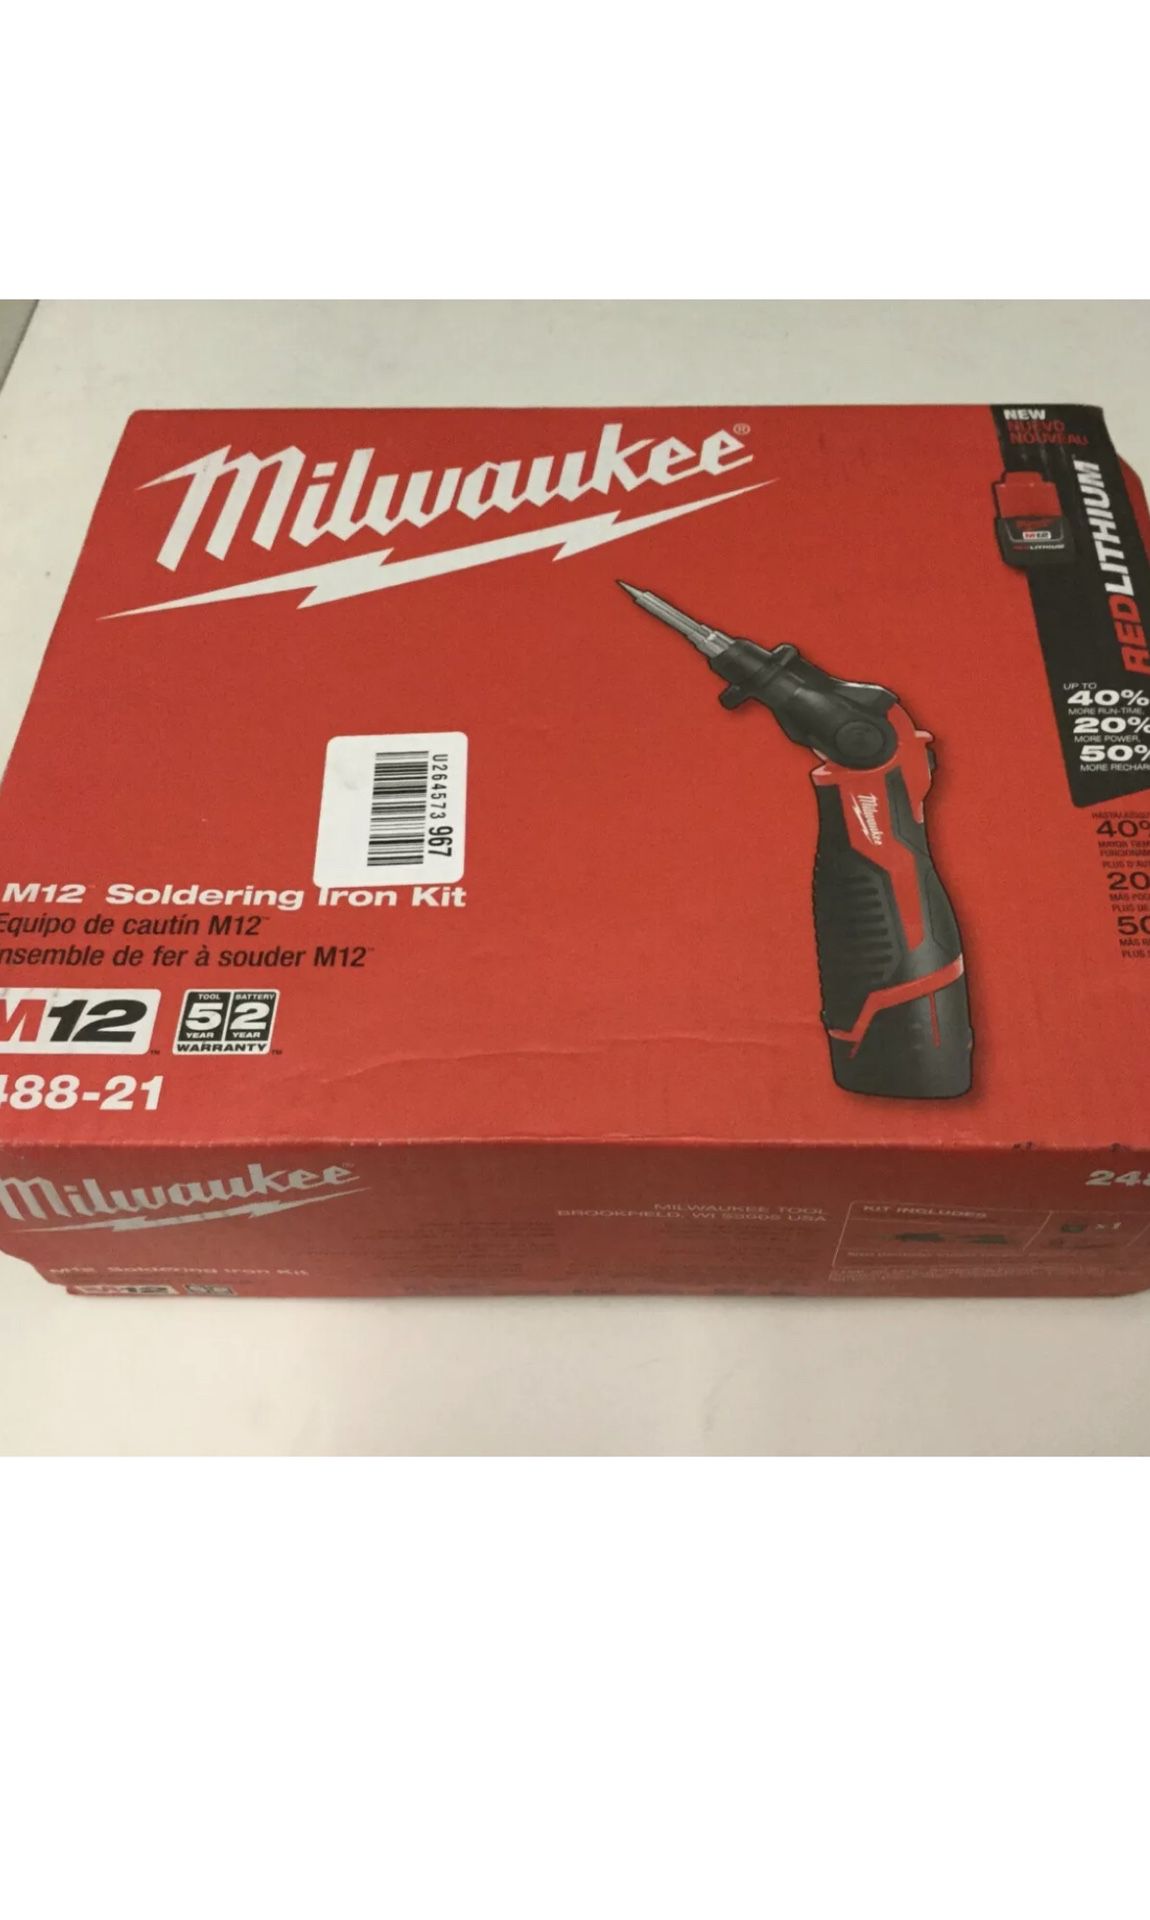 Milwaukee M12 Cordless Lithium-Ion Soldering Iron Kit. New In the Box 📦!